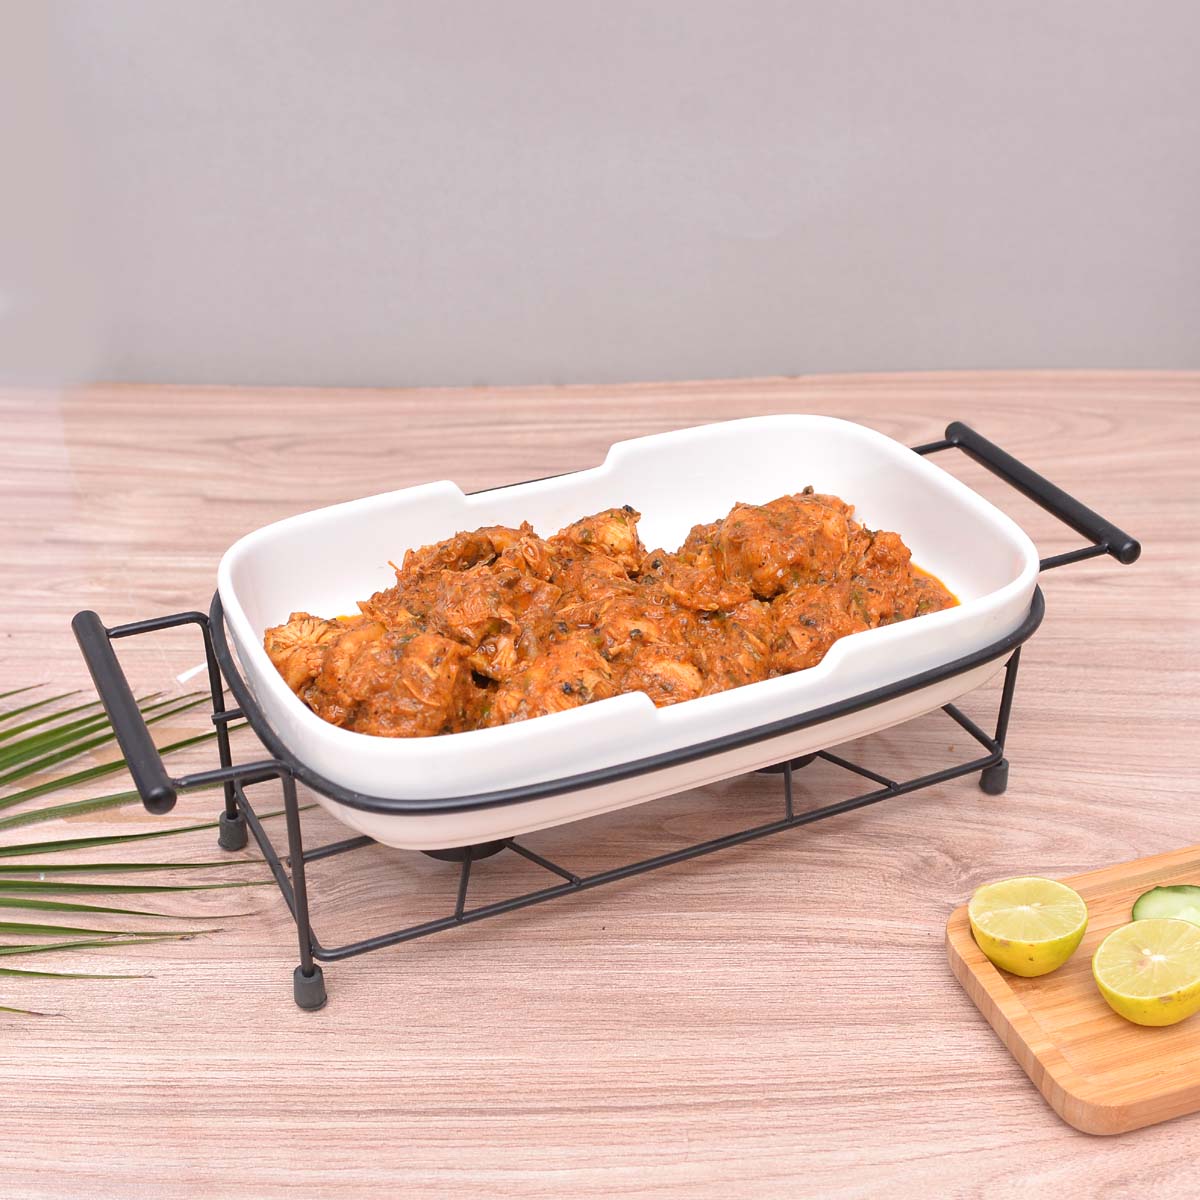 The Lavished Casserole Radiant Heated with Contrasted Black Stand - waseeh.com